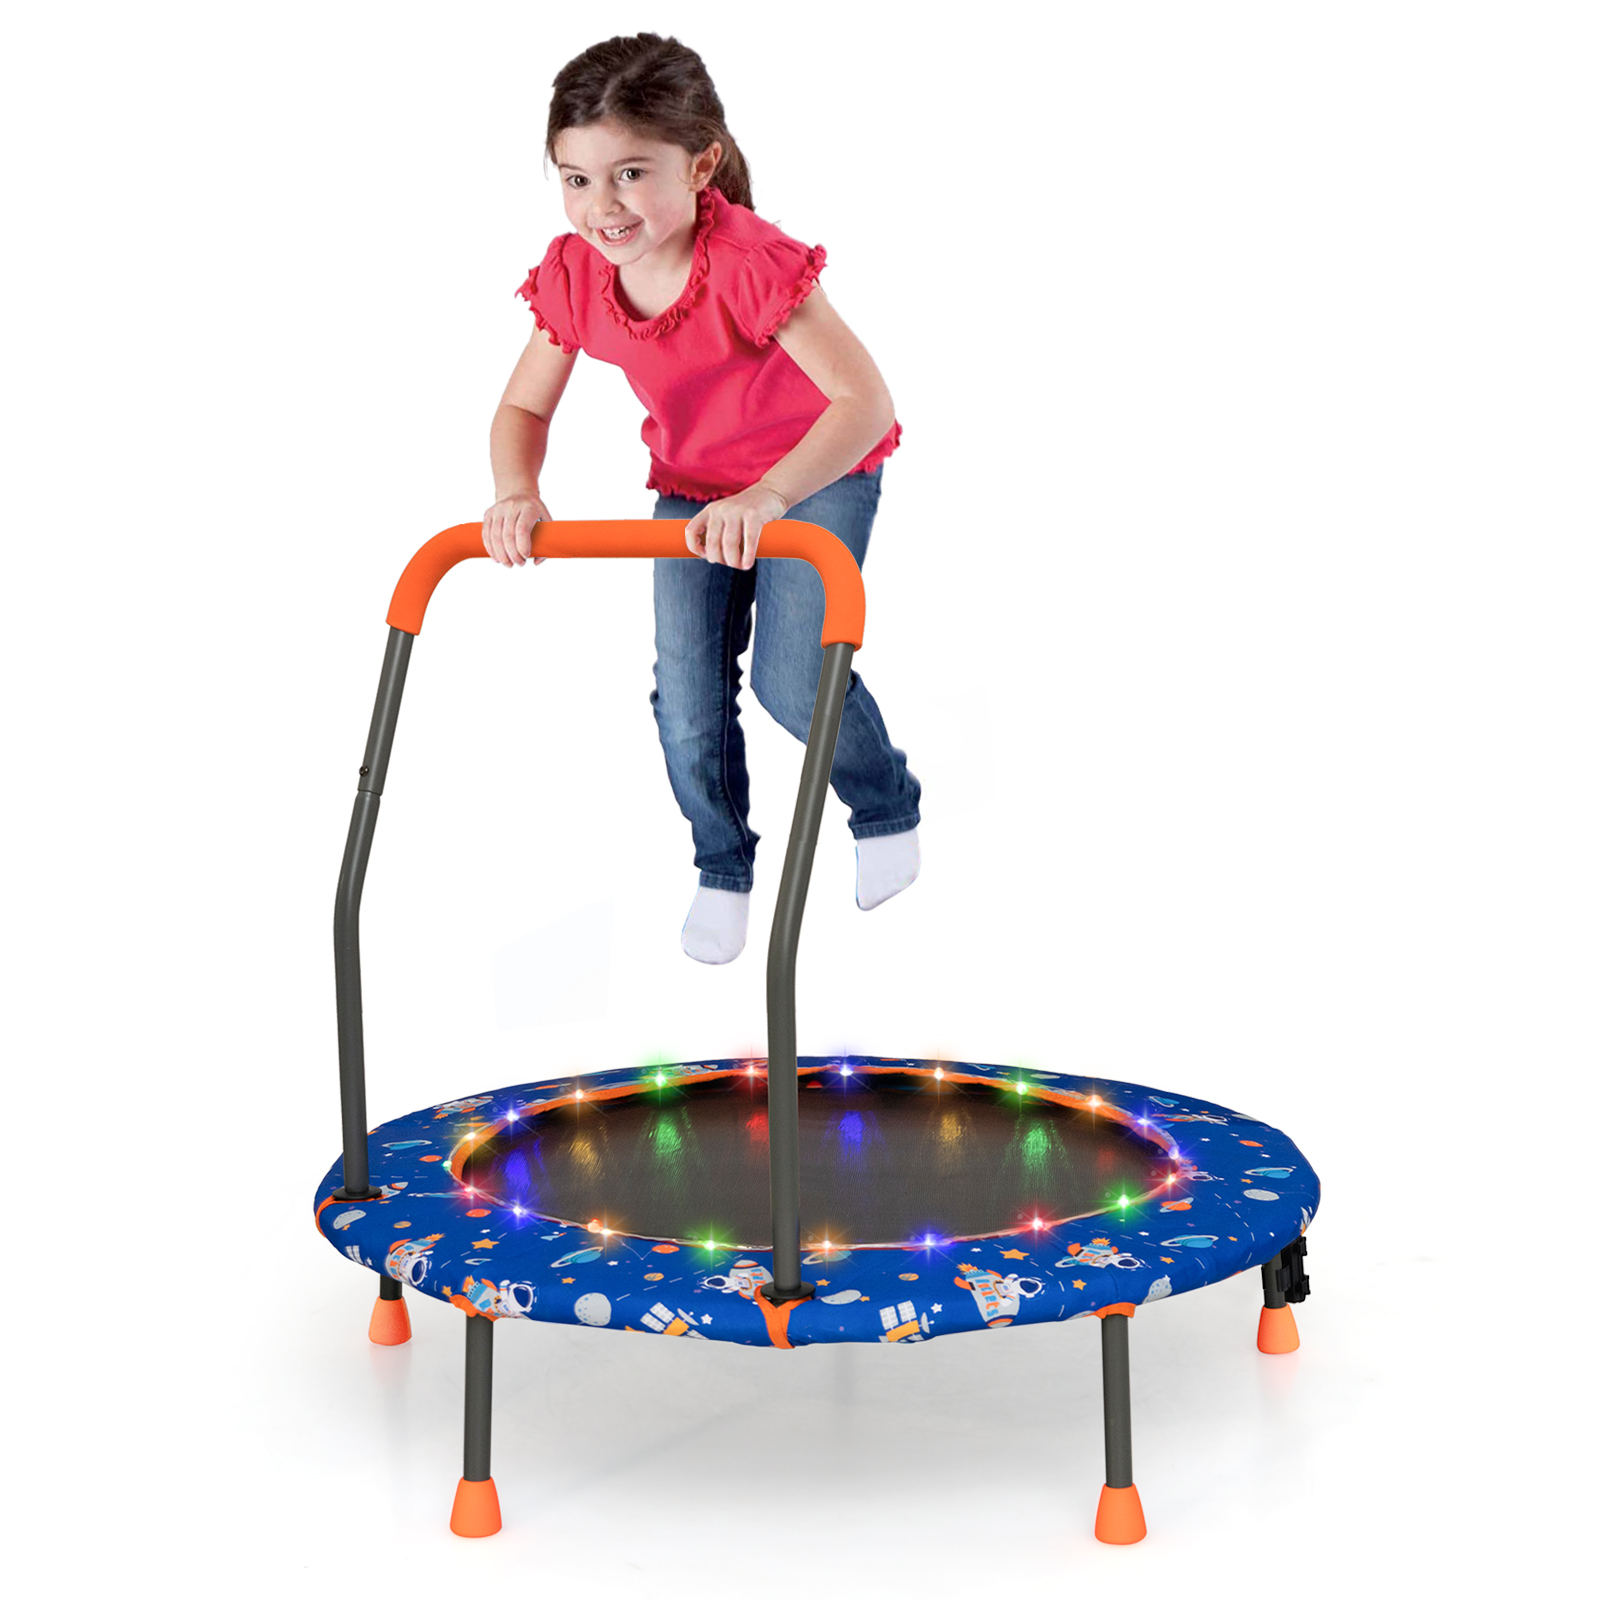 Mini Trampoline for Children with LED Lights and Safety Handle-Navy